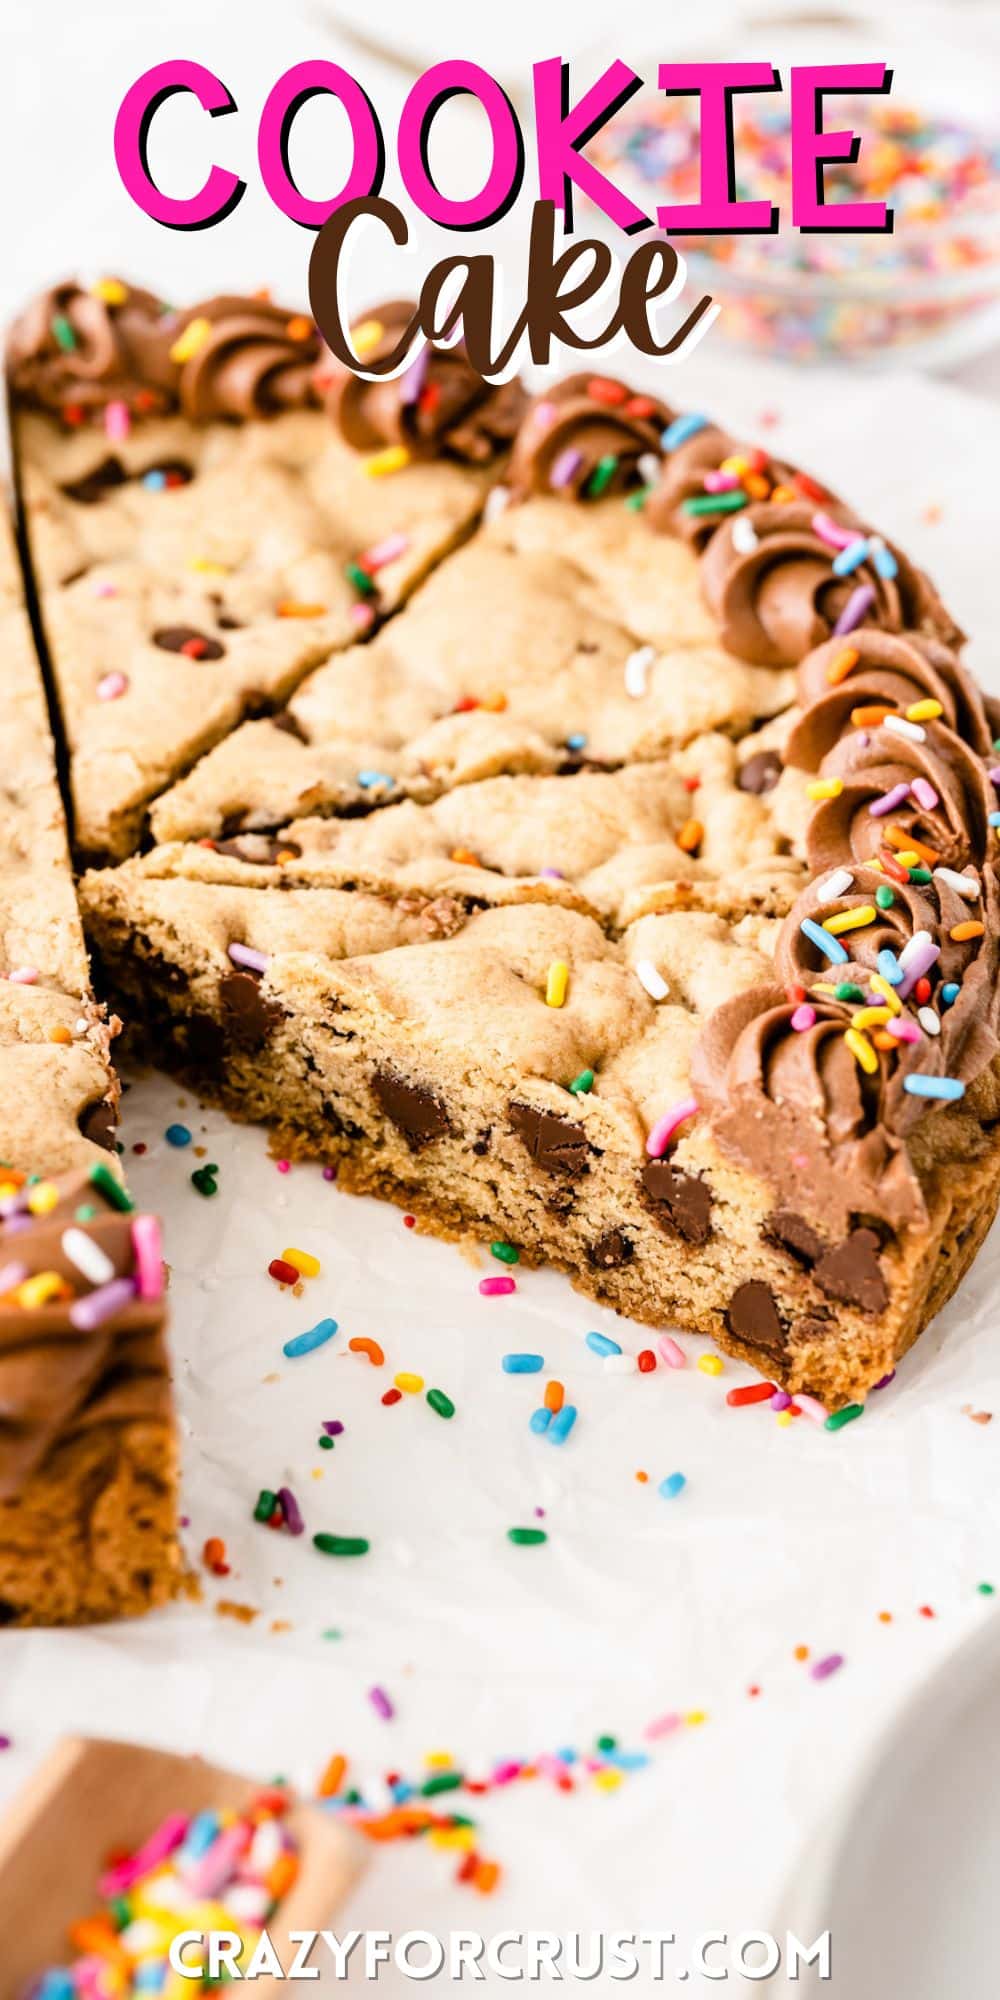 giant chocolate chip cookies with chocolate frosting and sprinkles on top with words on the image.